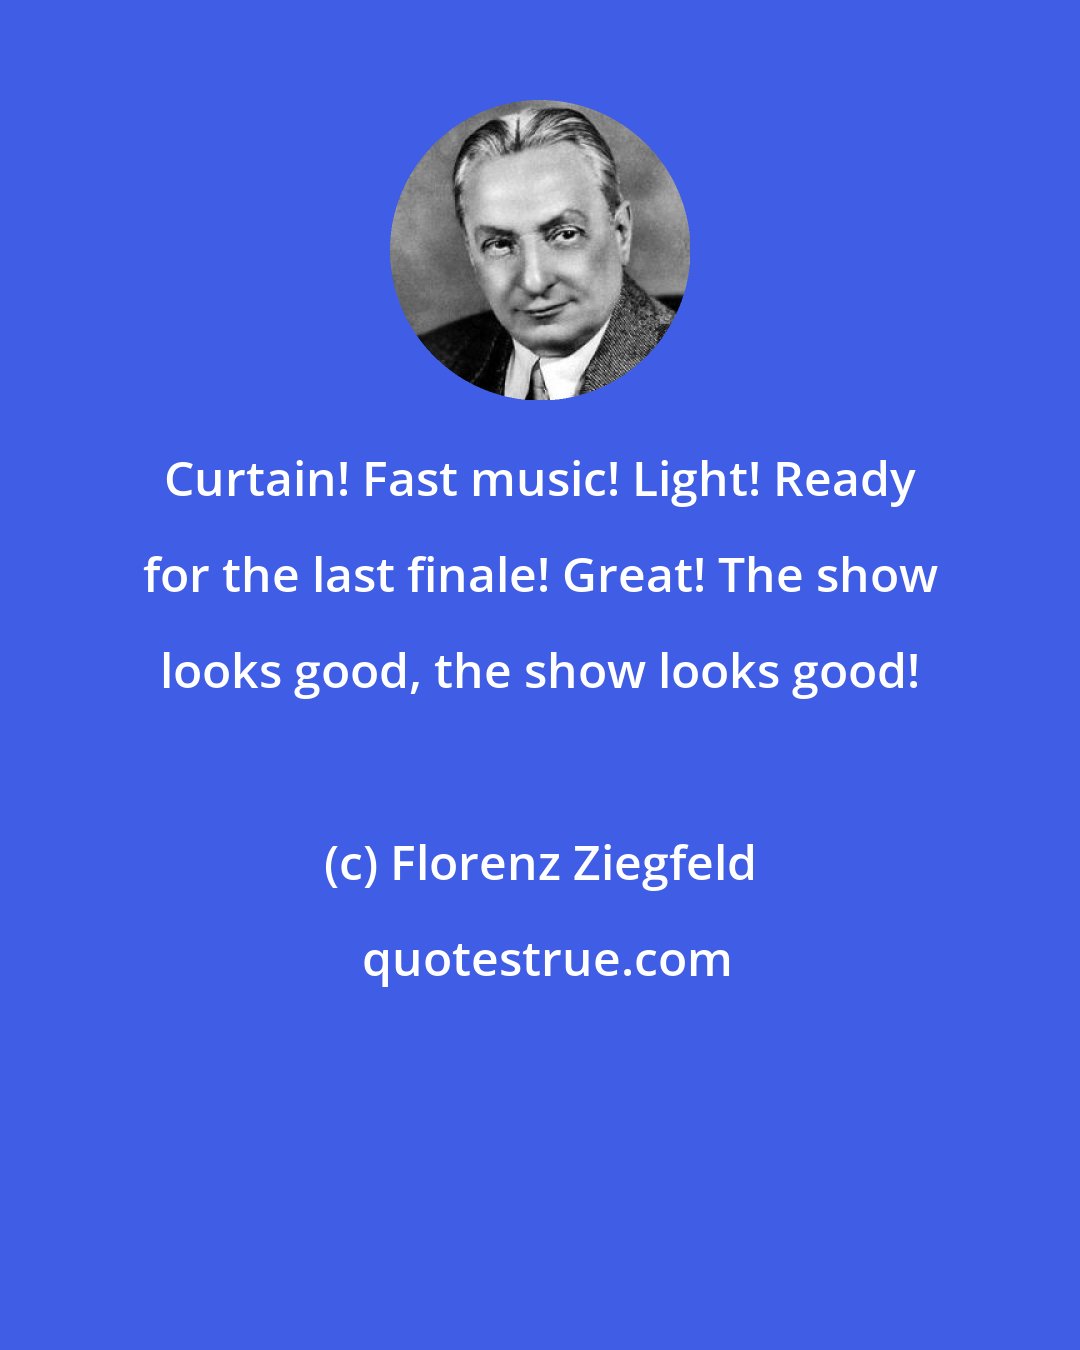 Florenz Ziegfeld: Curtain! Fast music! Light! Ready for the last finale! Great! The show looks good, the show looks good!